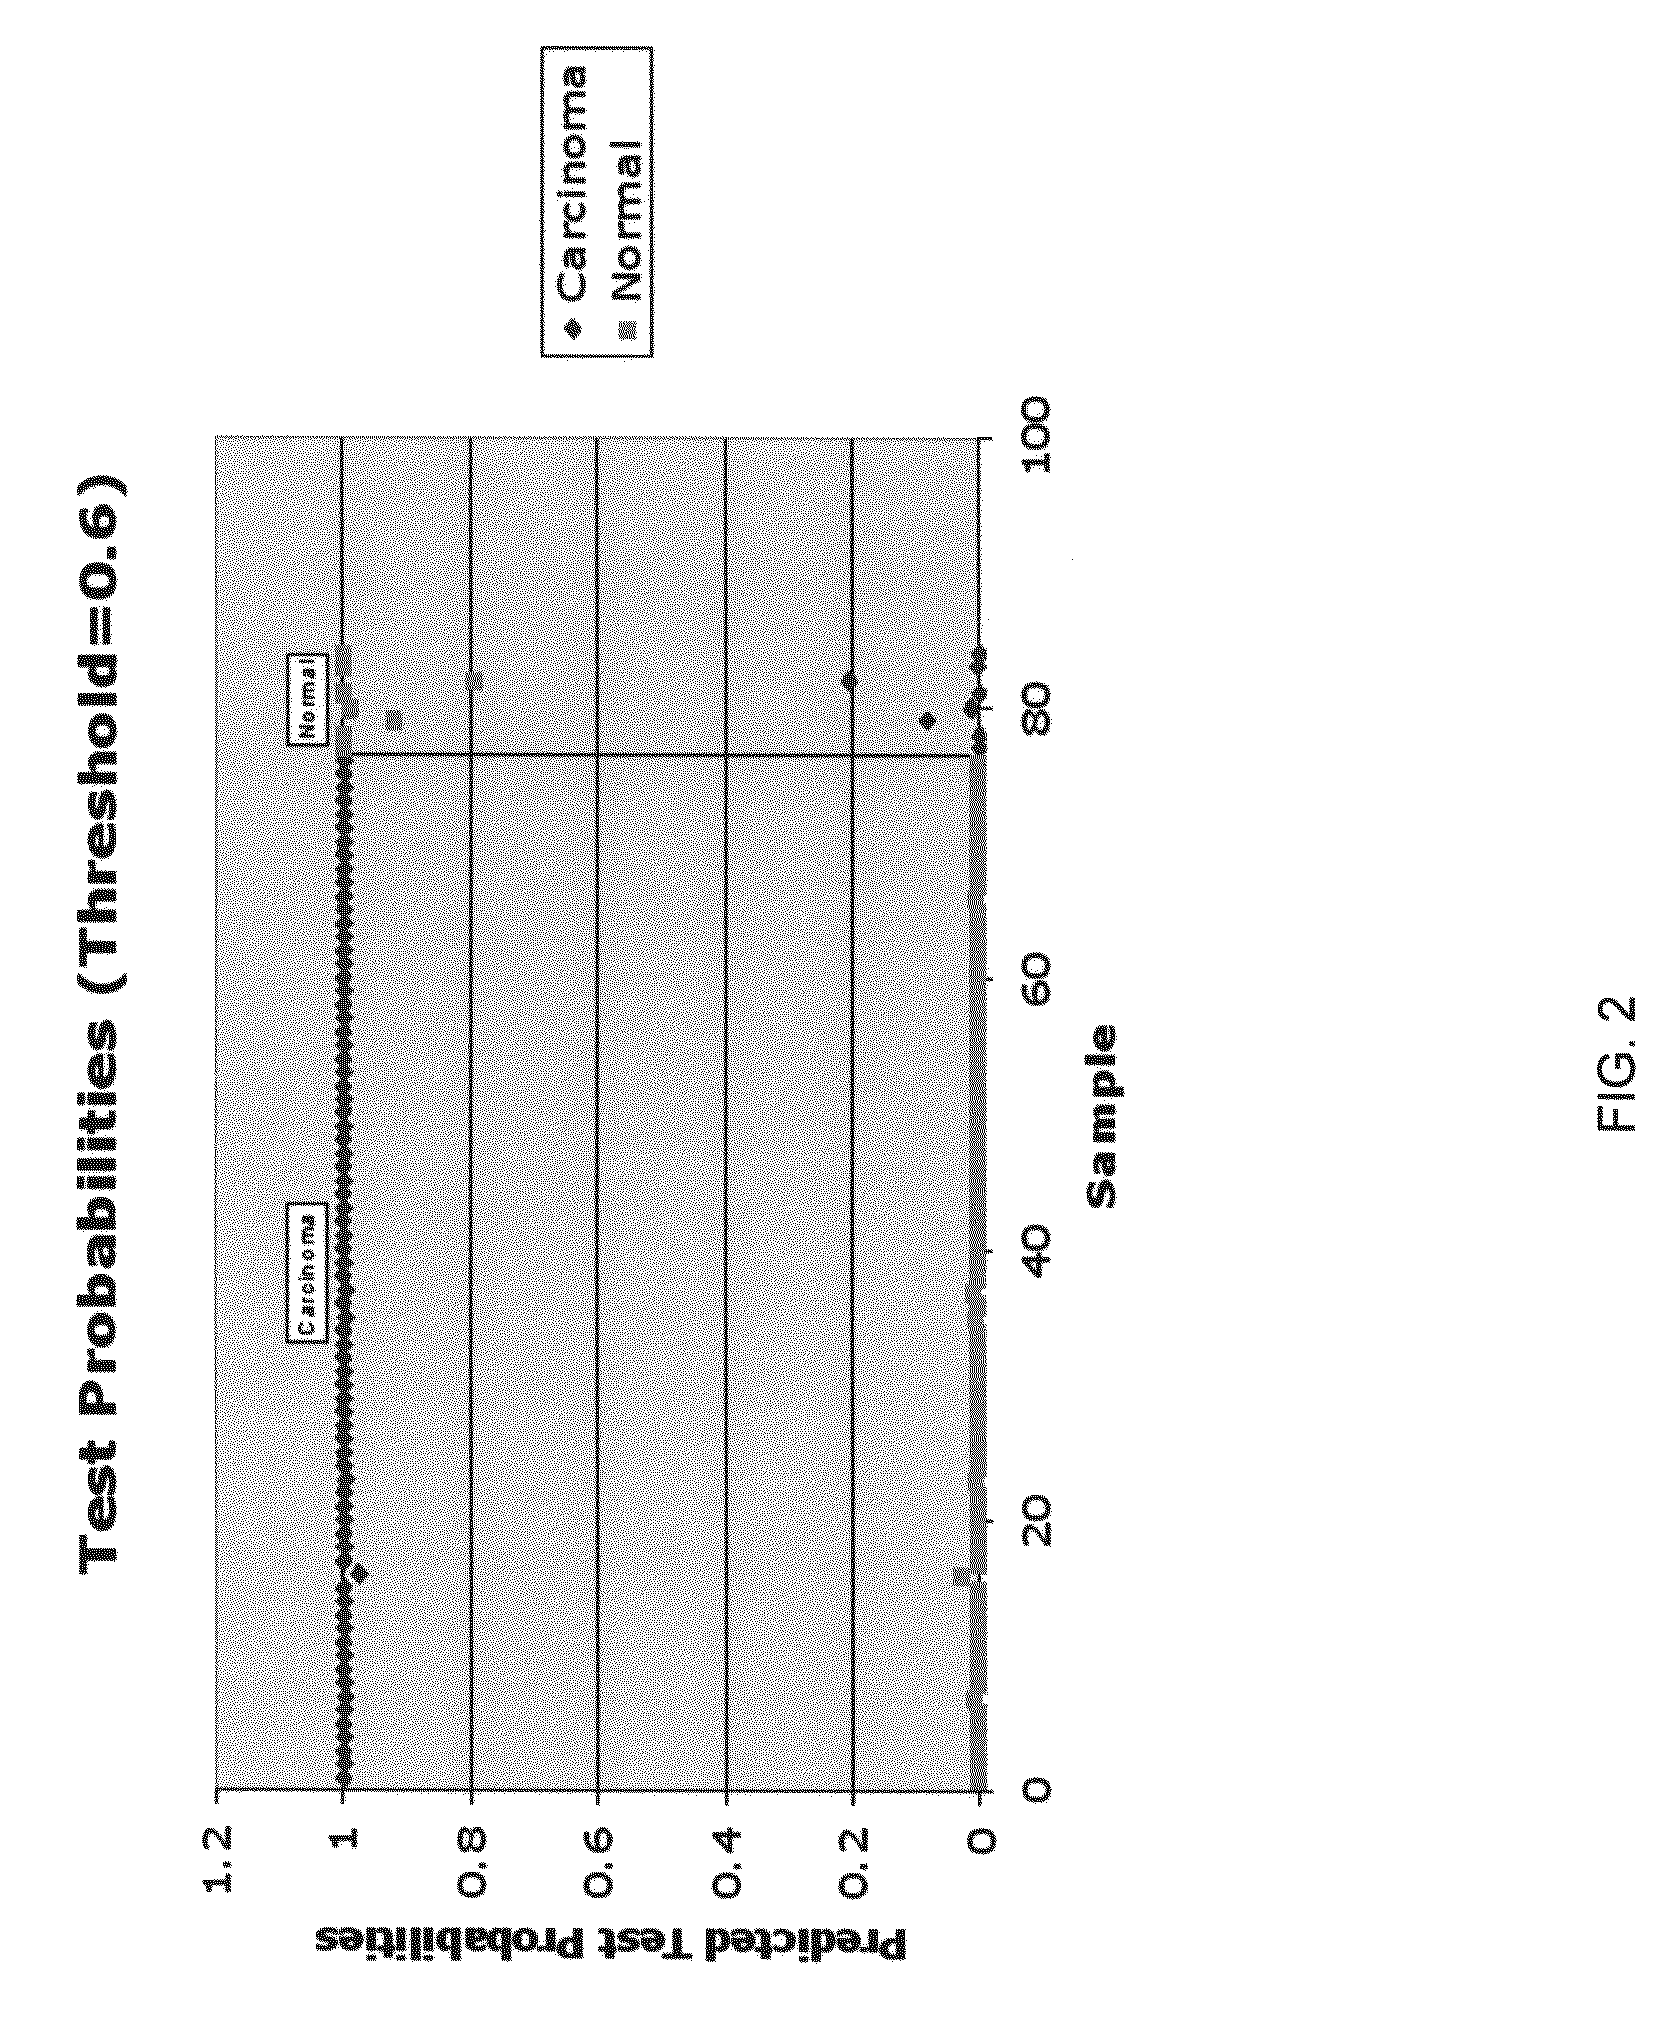 MicroRNA-based methods and compositions for the diagnosis, prognosis and treatment of breast cancer